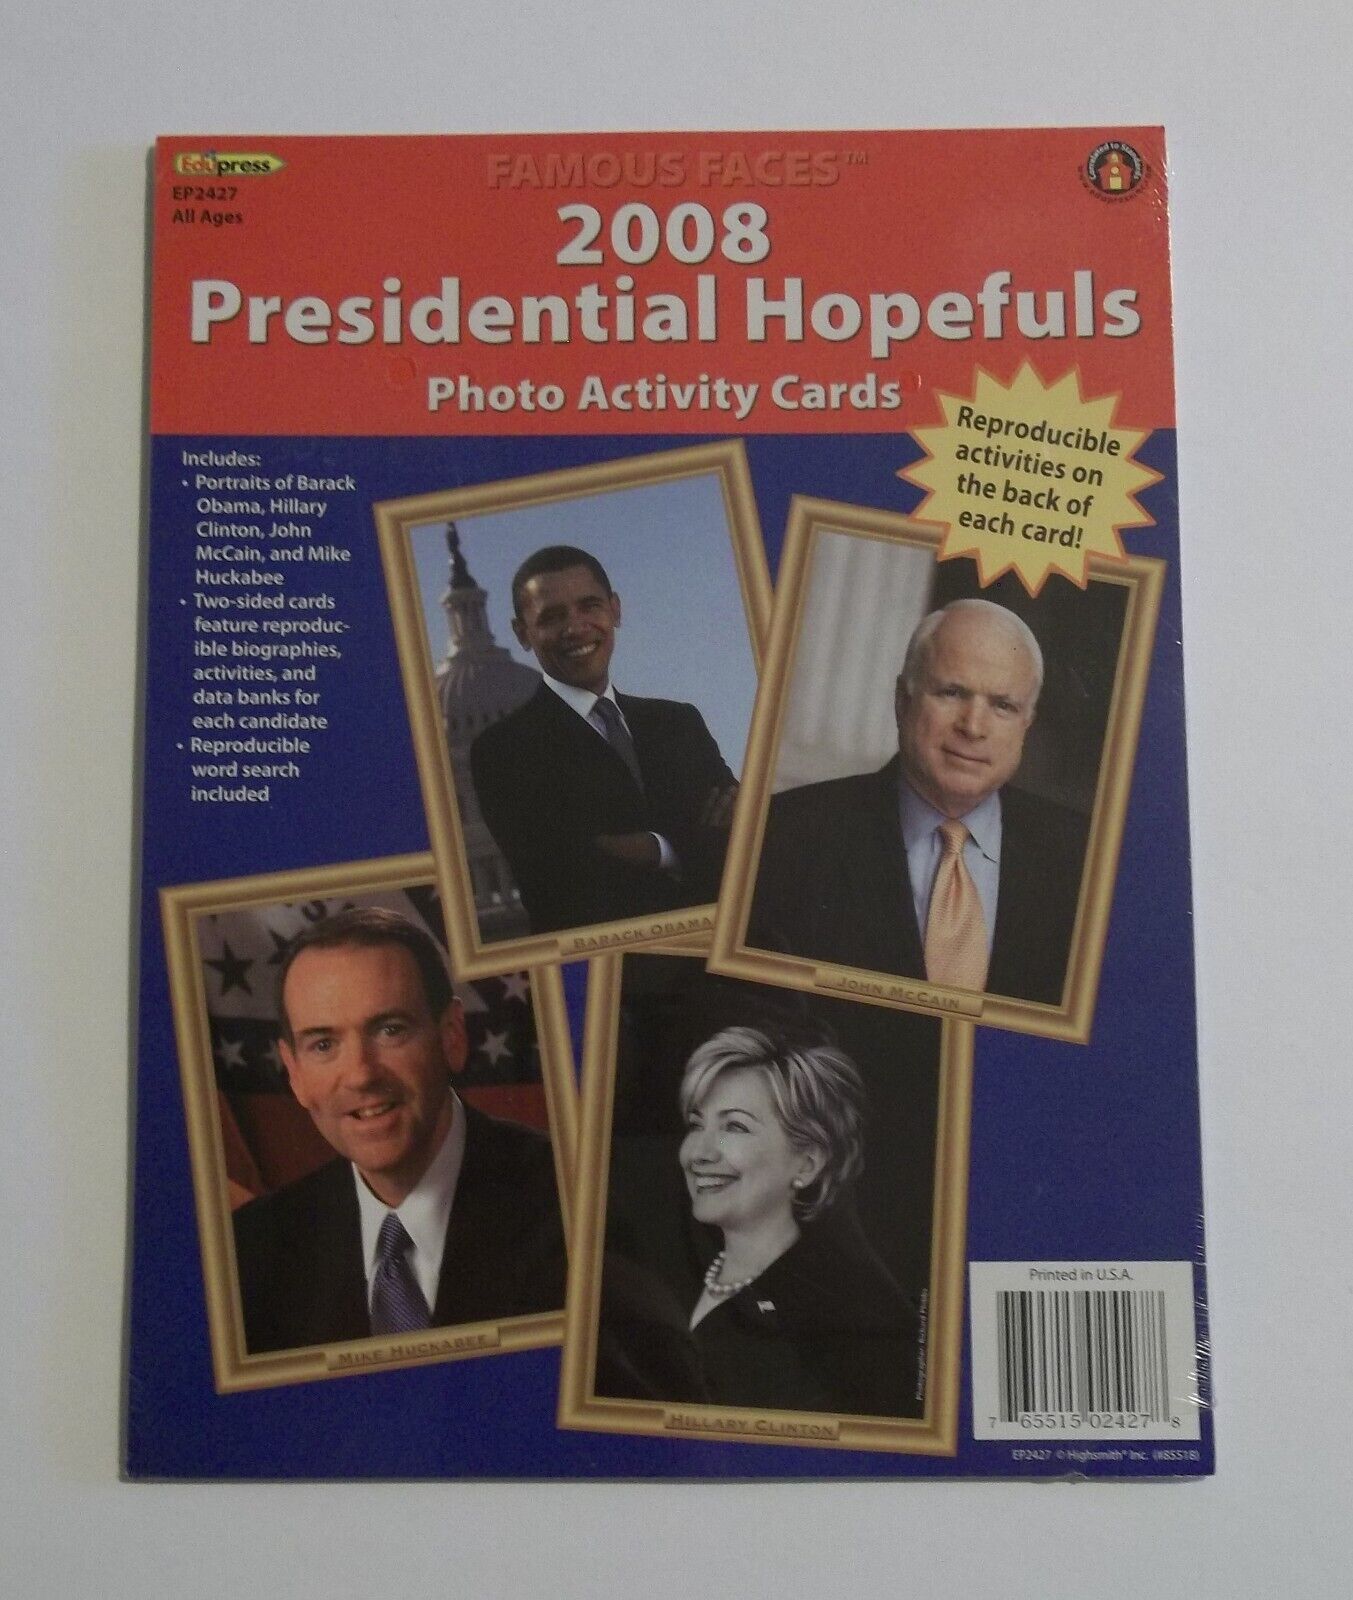 Famous Faces 2008 Presidential Hopefuls Photo Activity Cards New Sealed